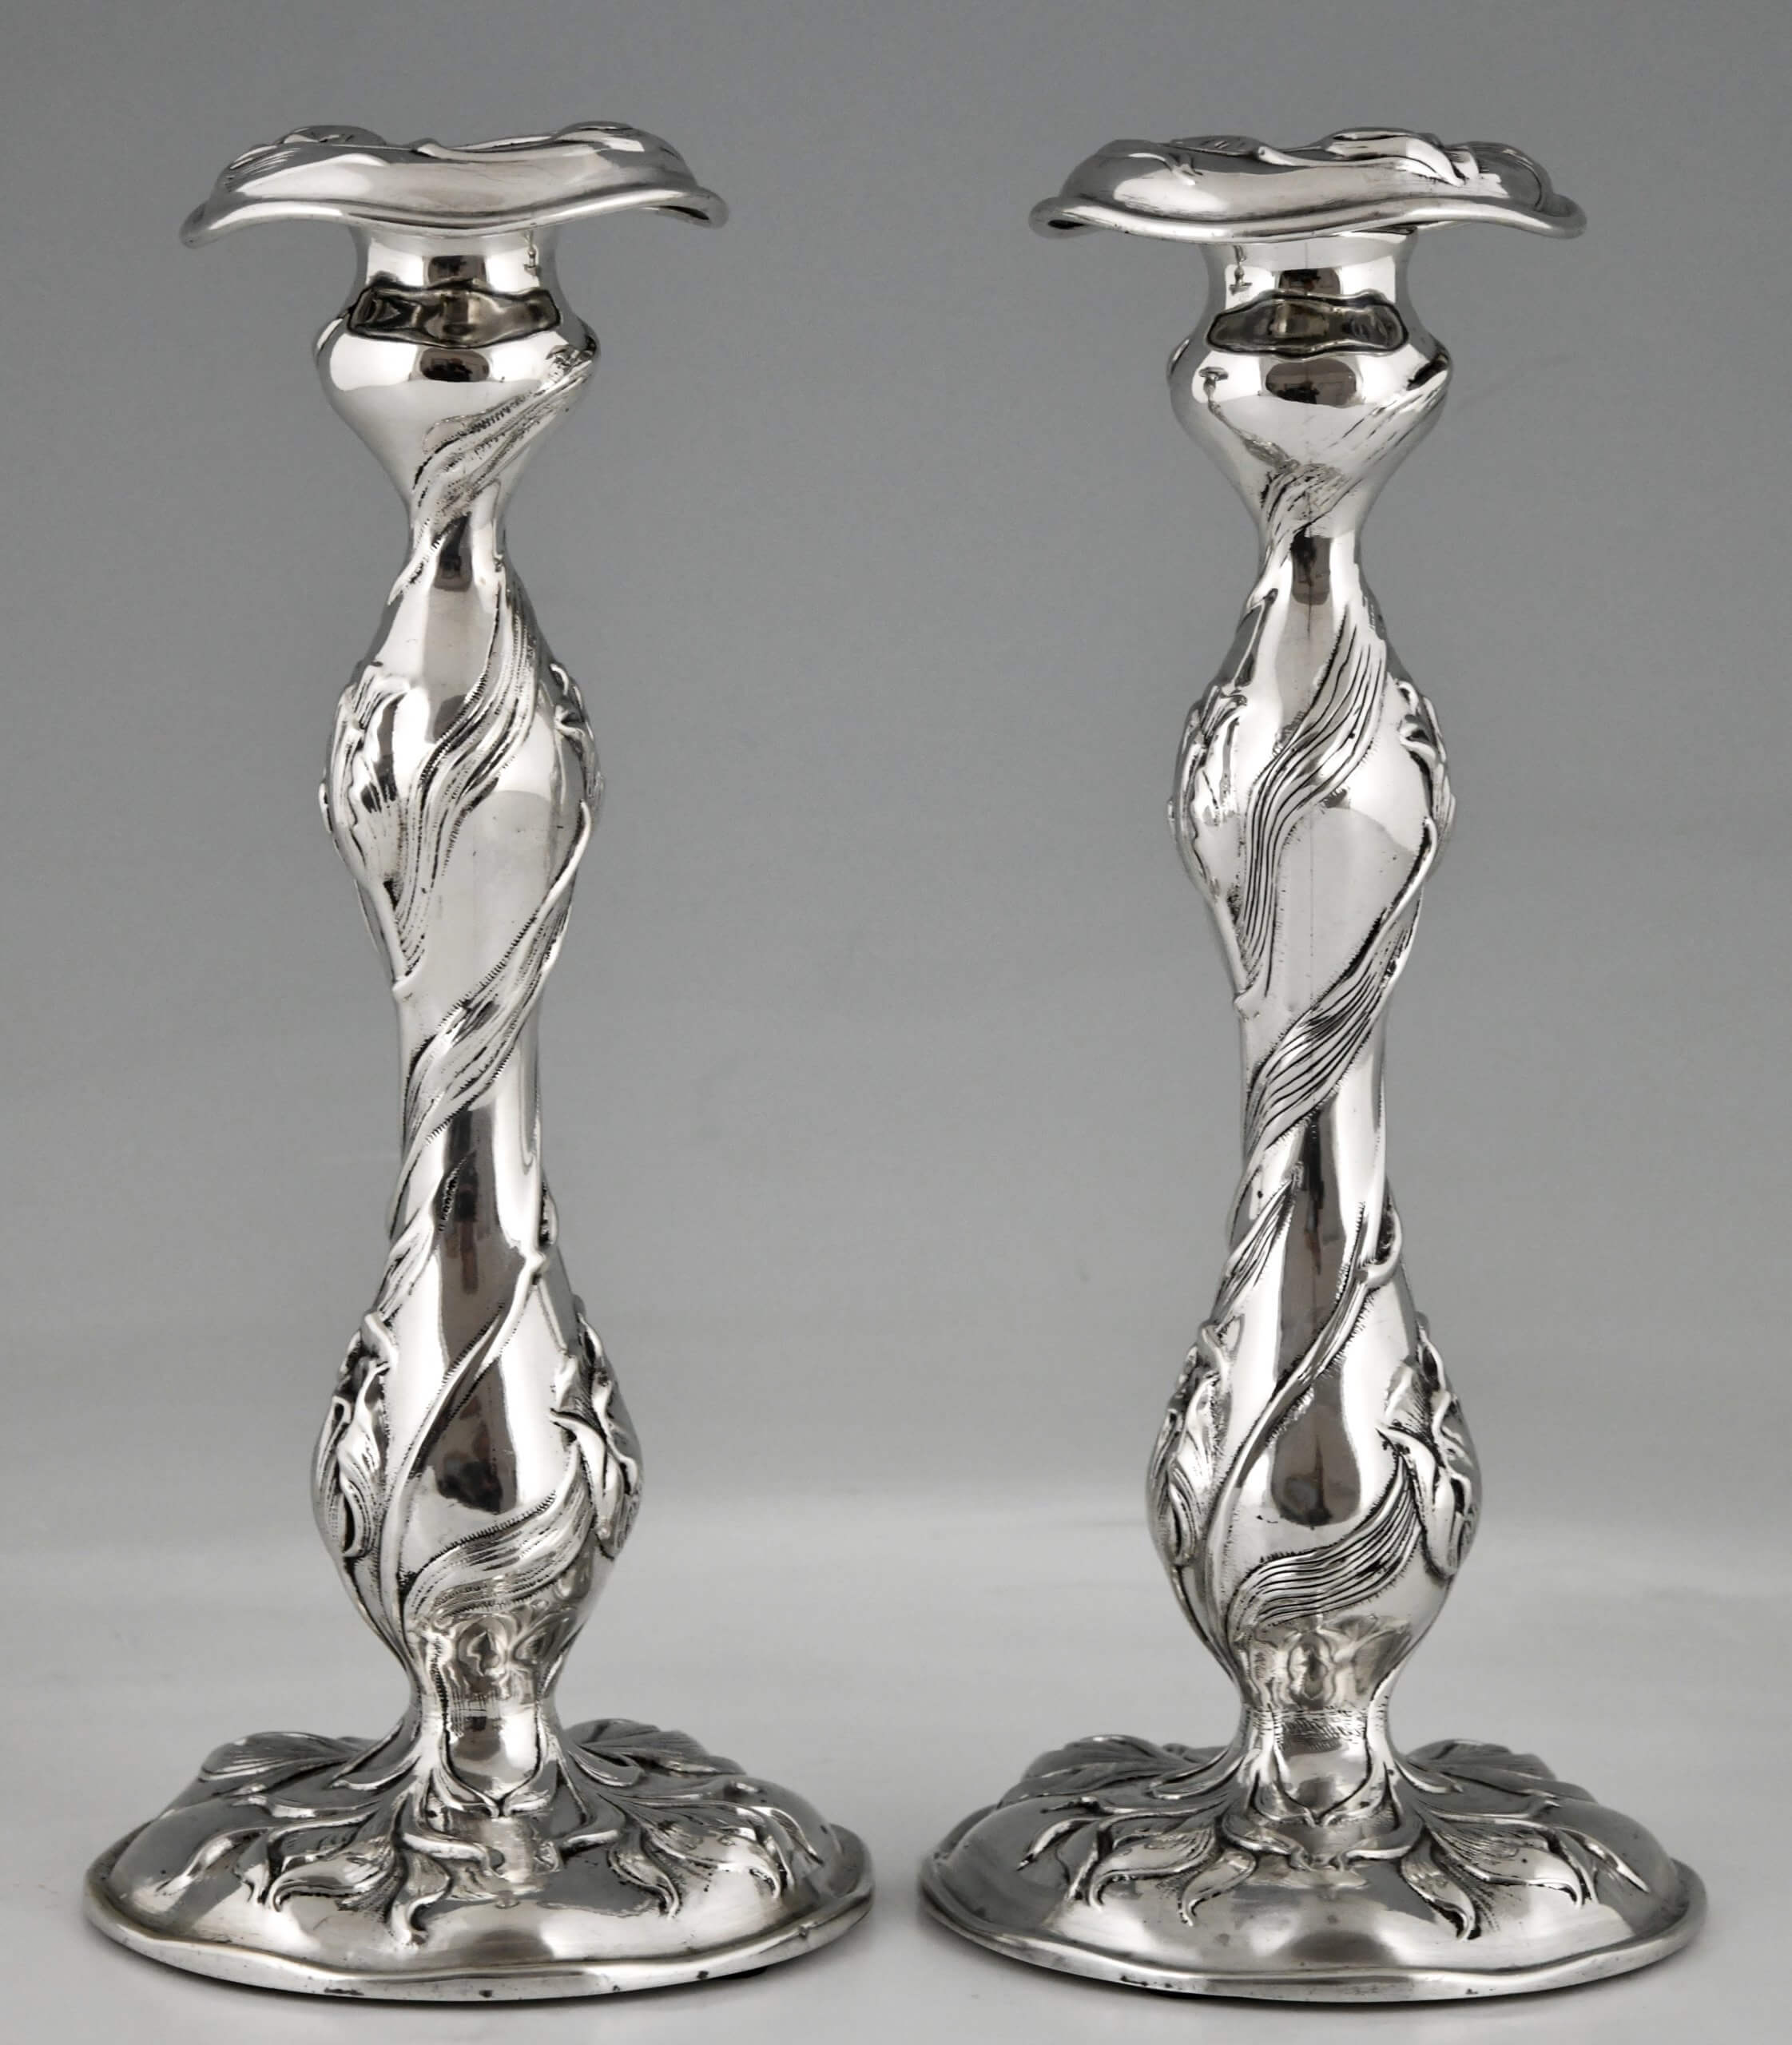 American silver Art Nouveau candlesticks with flowers.